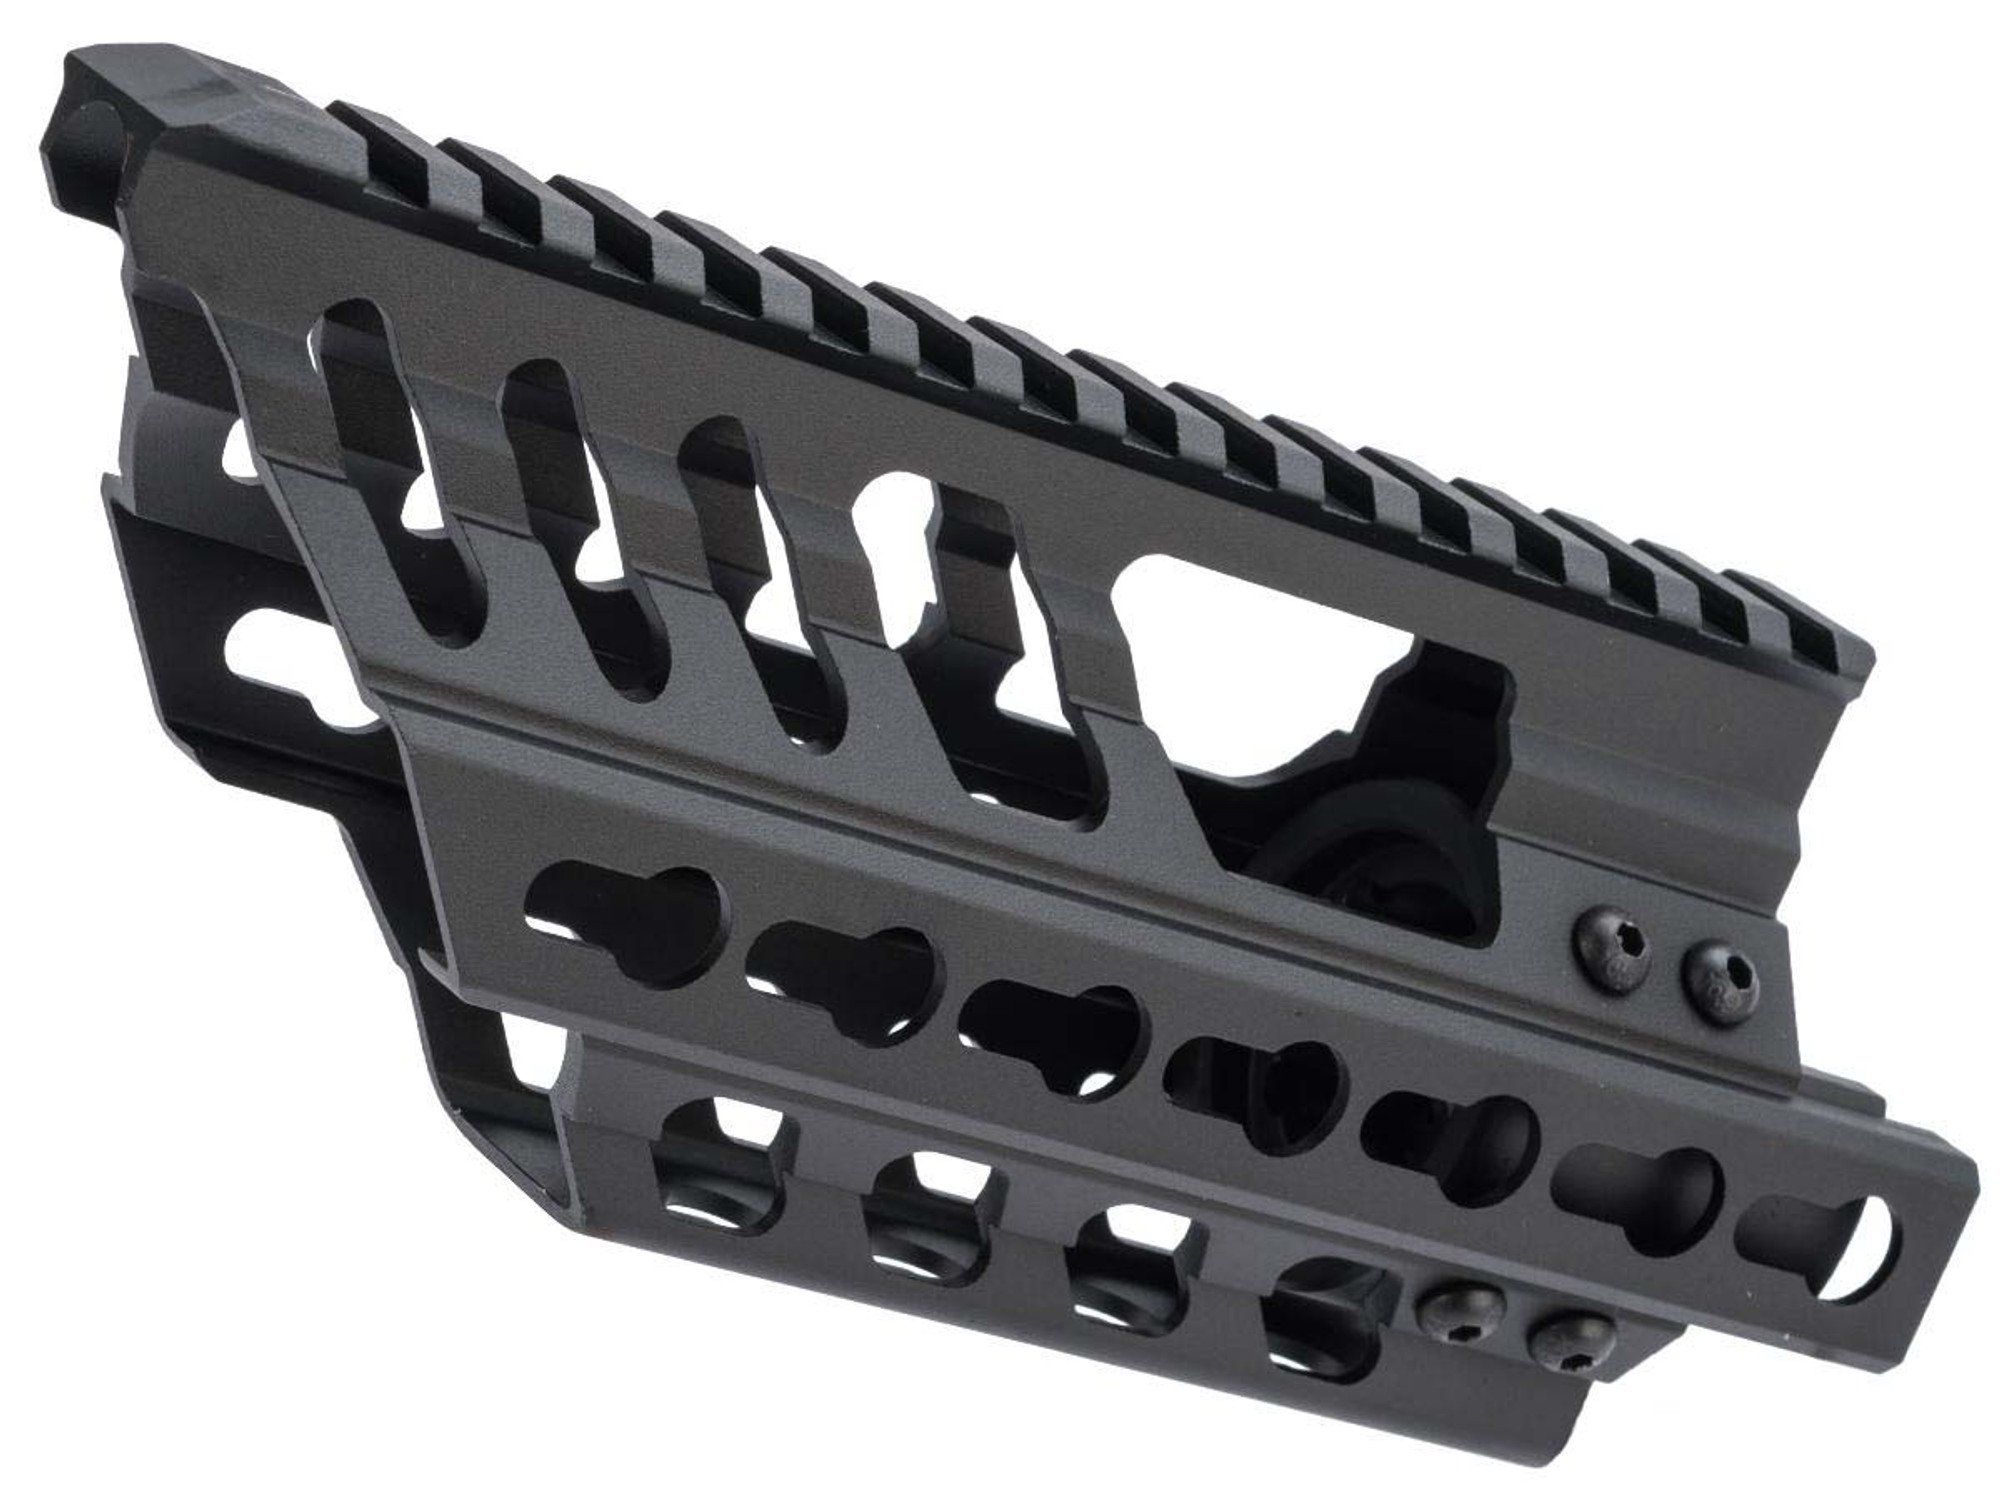 CYMA Tactical Railed Extended Handguard for P90 Series AEGs (Type: Keymod)